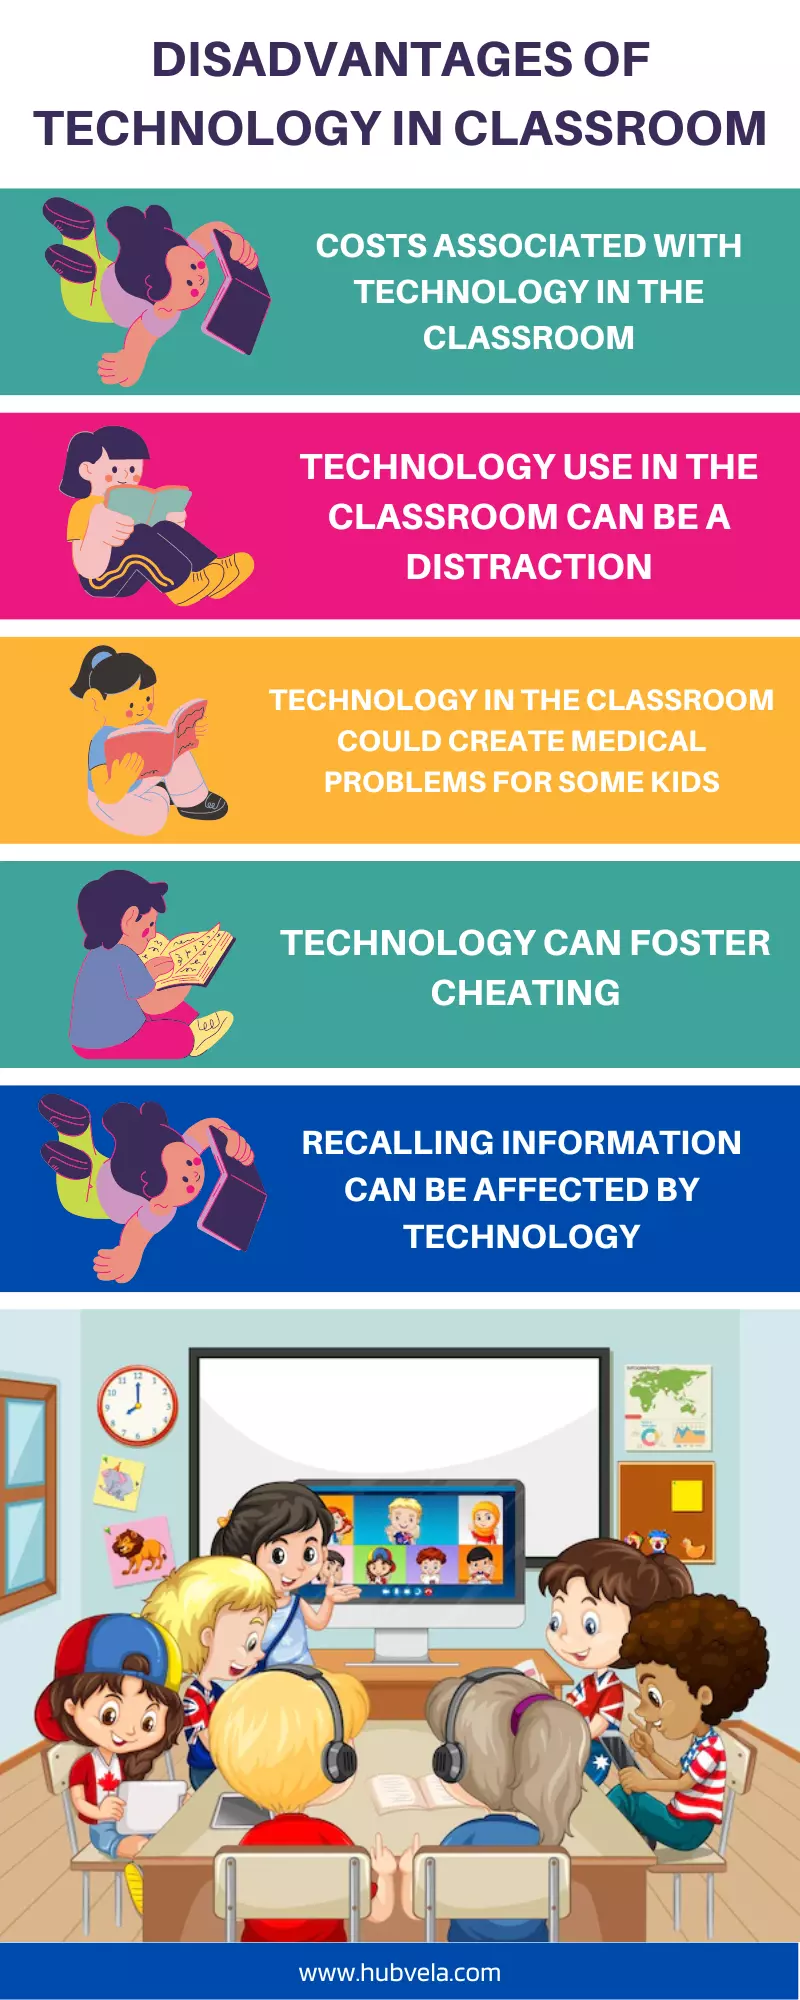 Technology disadvantages in classrooms infographic